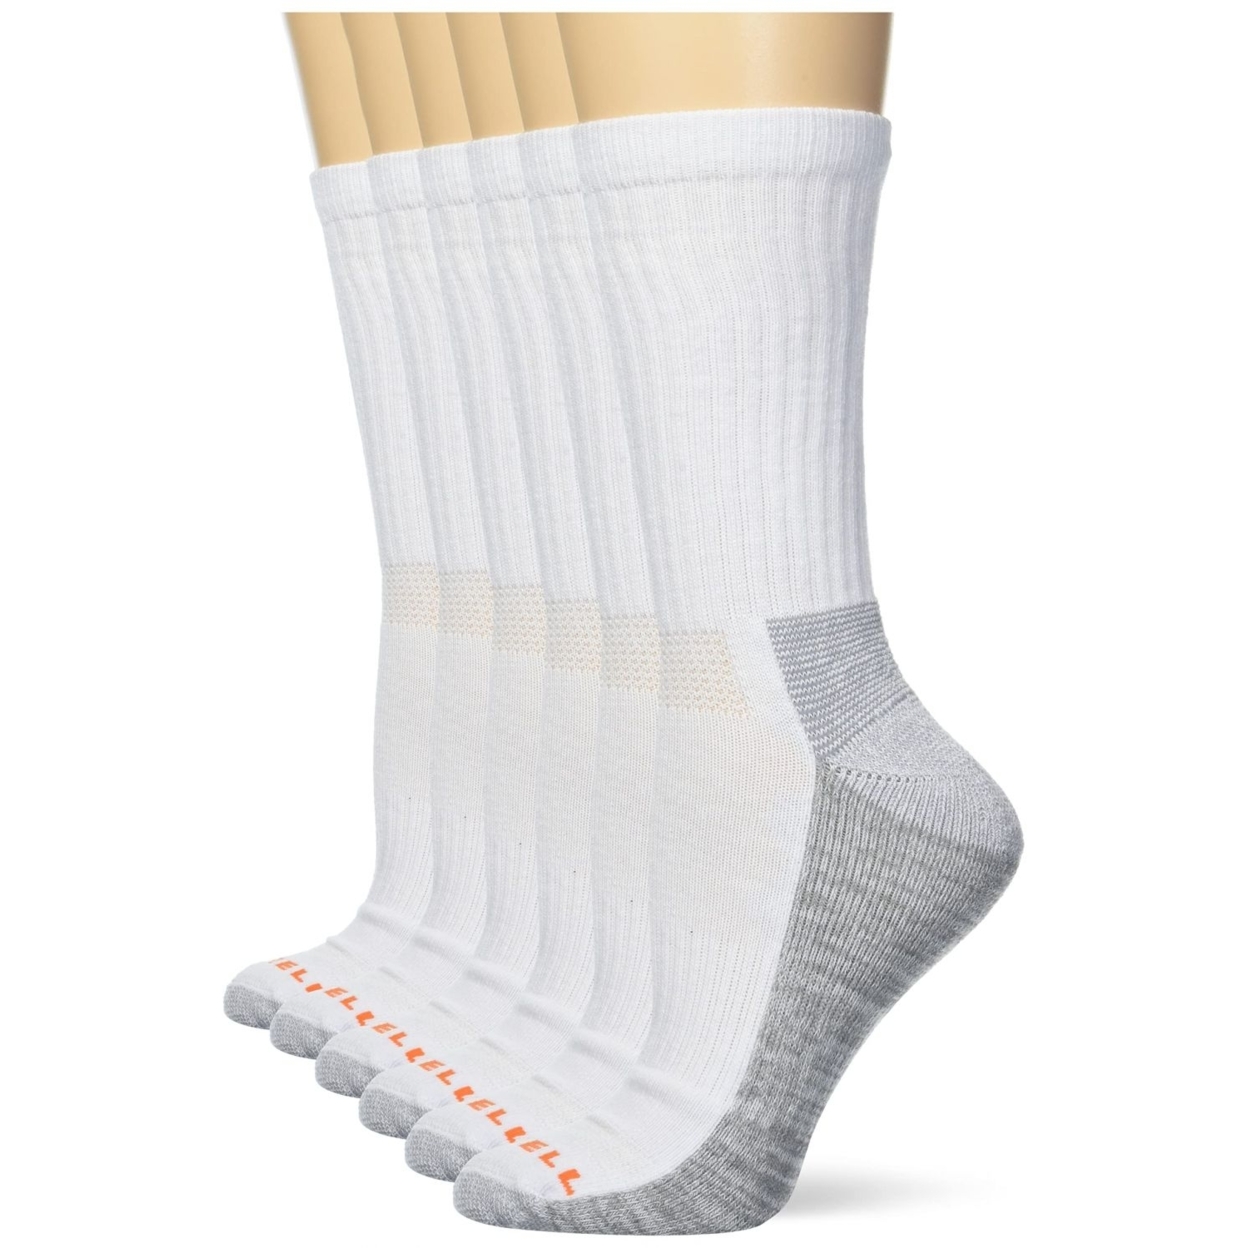 Merrell Men's And Women's Durable Everyday Work Crew Socks - Unisex 6 Pair Pack - Arch Support And Anti-Odor Cotton WHITE - WHITE, 13-15